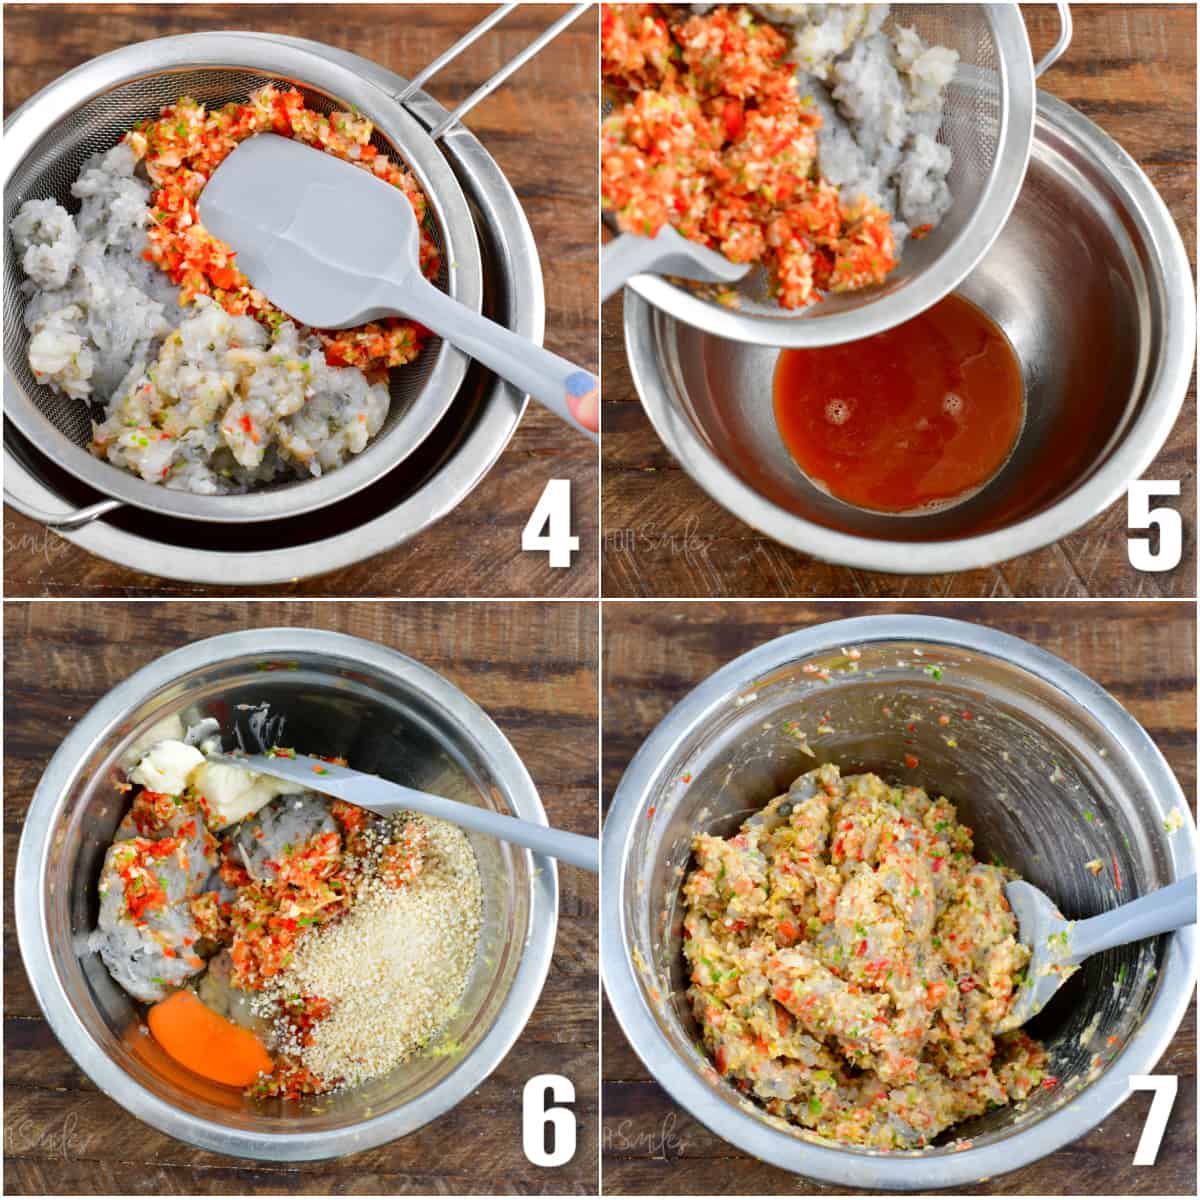 One image shows veggies being strained. The second image shows the juices from the strained veggies in a mixing bowl. The third image shows the ingredients for the patties in a mixing bowl. In the fourth image, all ingredients have been mixed. 